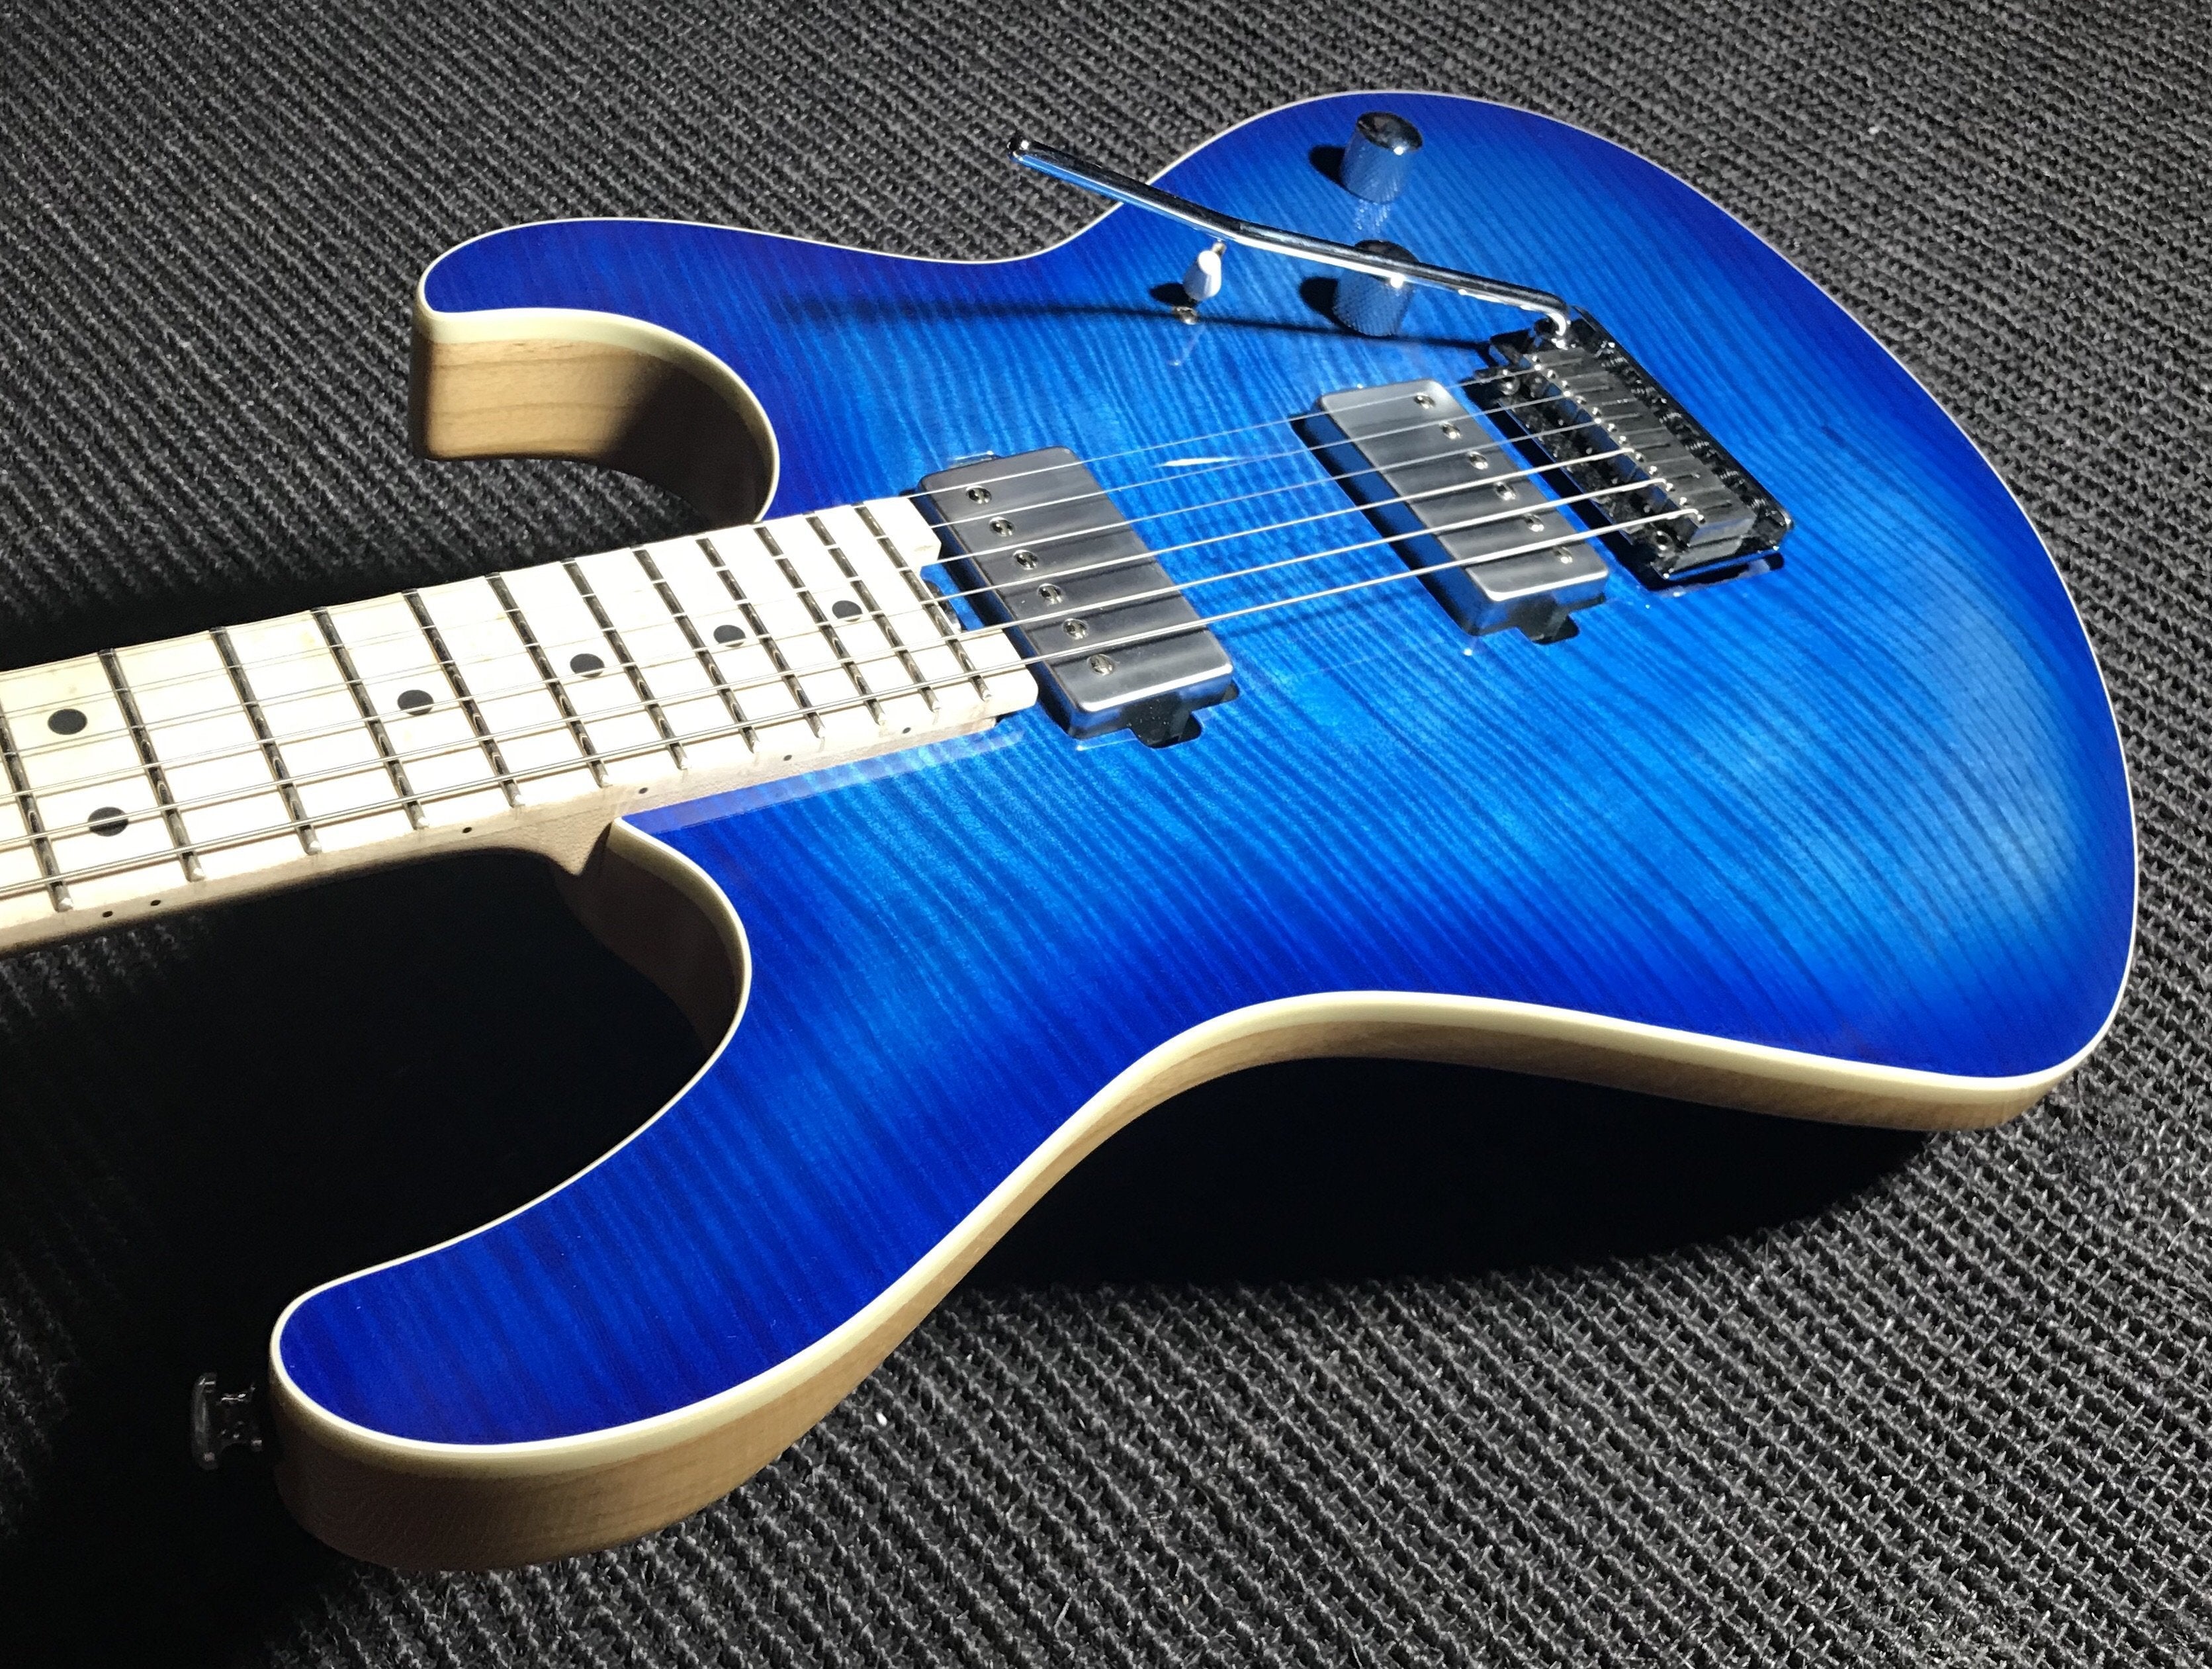 Cort G290 FAT II Bright Blue Burst, Electric Guitar for sale at Richards Guitars.